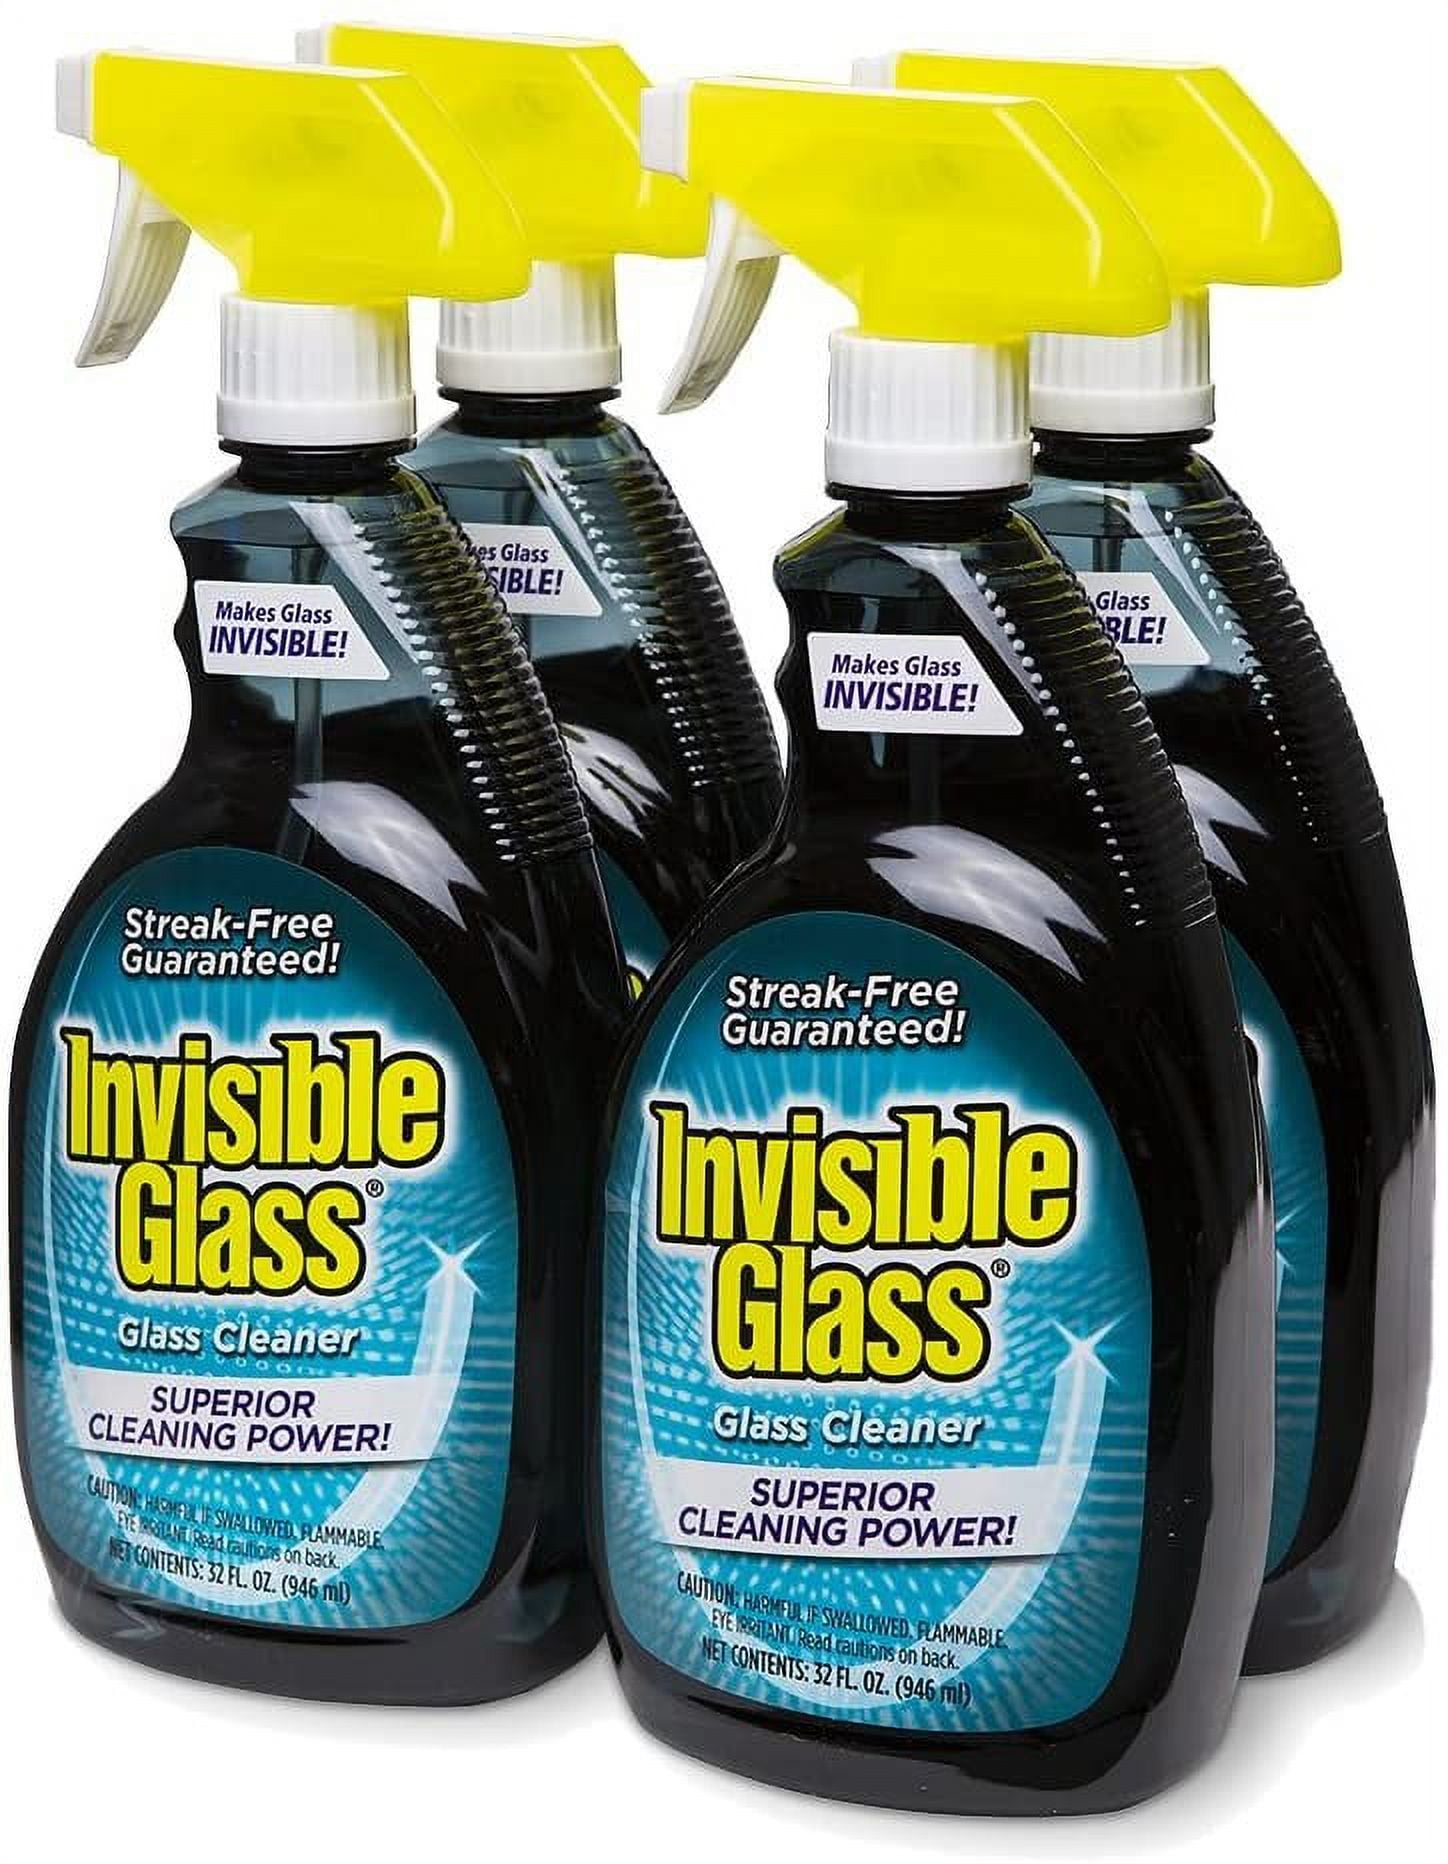 No-Haze Ready-to-Use Glass Cleaner